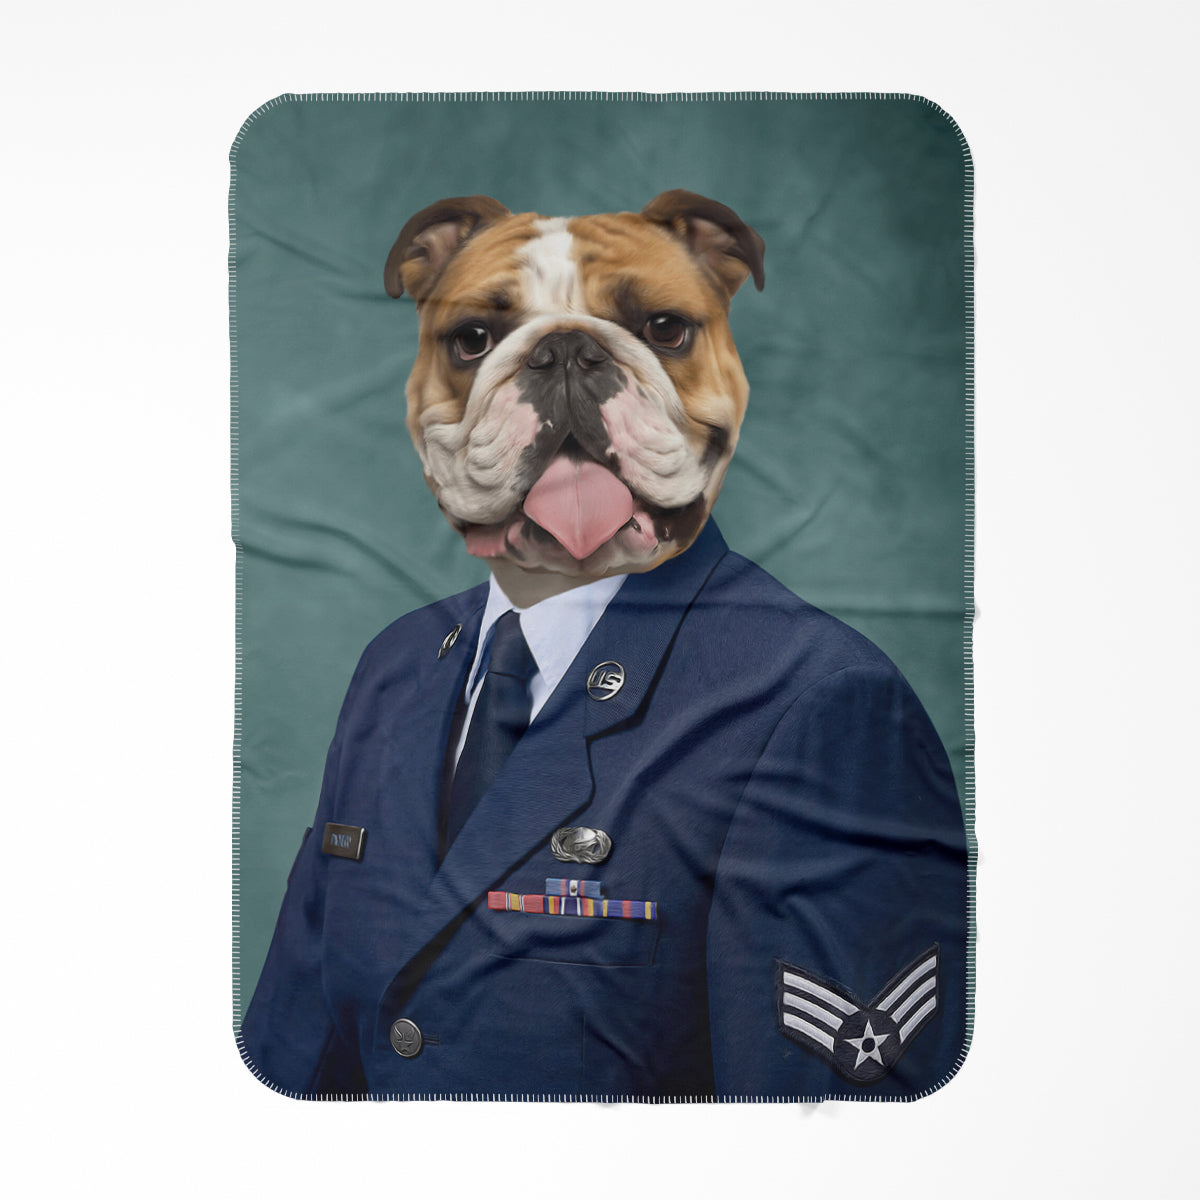 The US Male Navy Officer Paw & Glory, pawandglory, Pet Portraits blanket, pet picture on blanket, custom pet blanket, dog photo blanket, blanket with dog on it, dog on blanket, best pet photo blanket